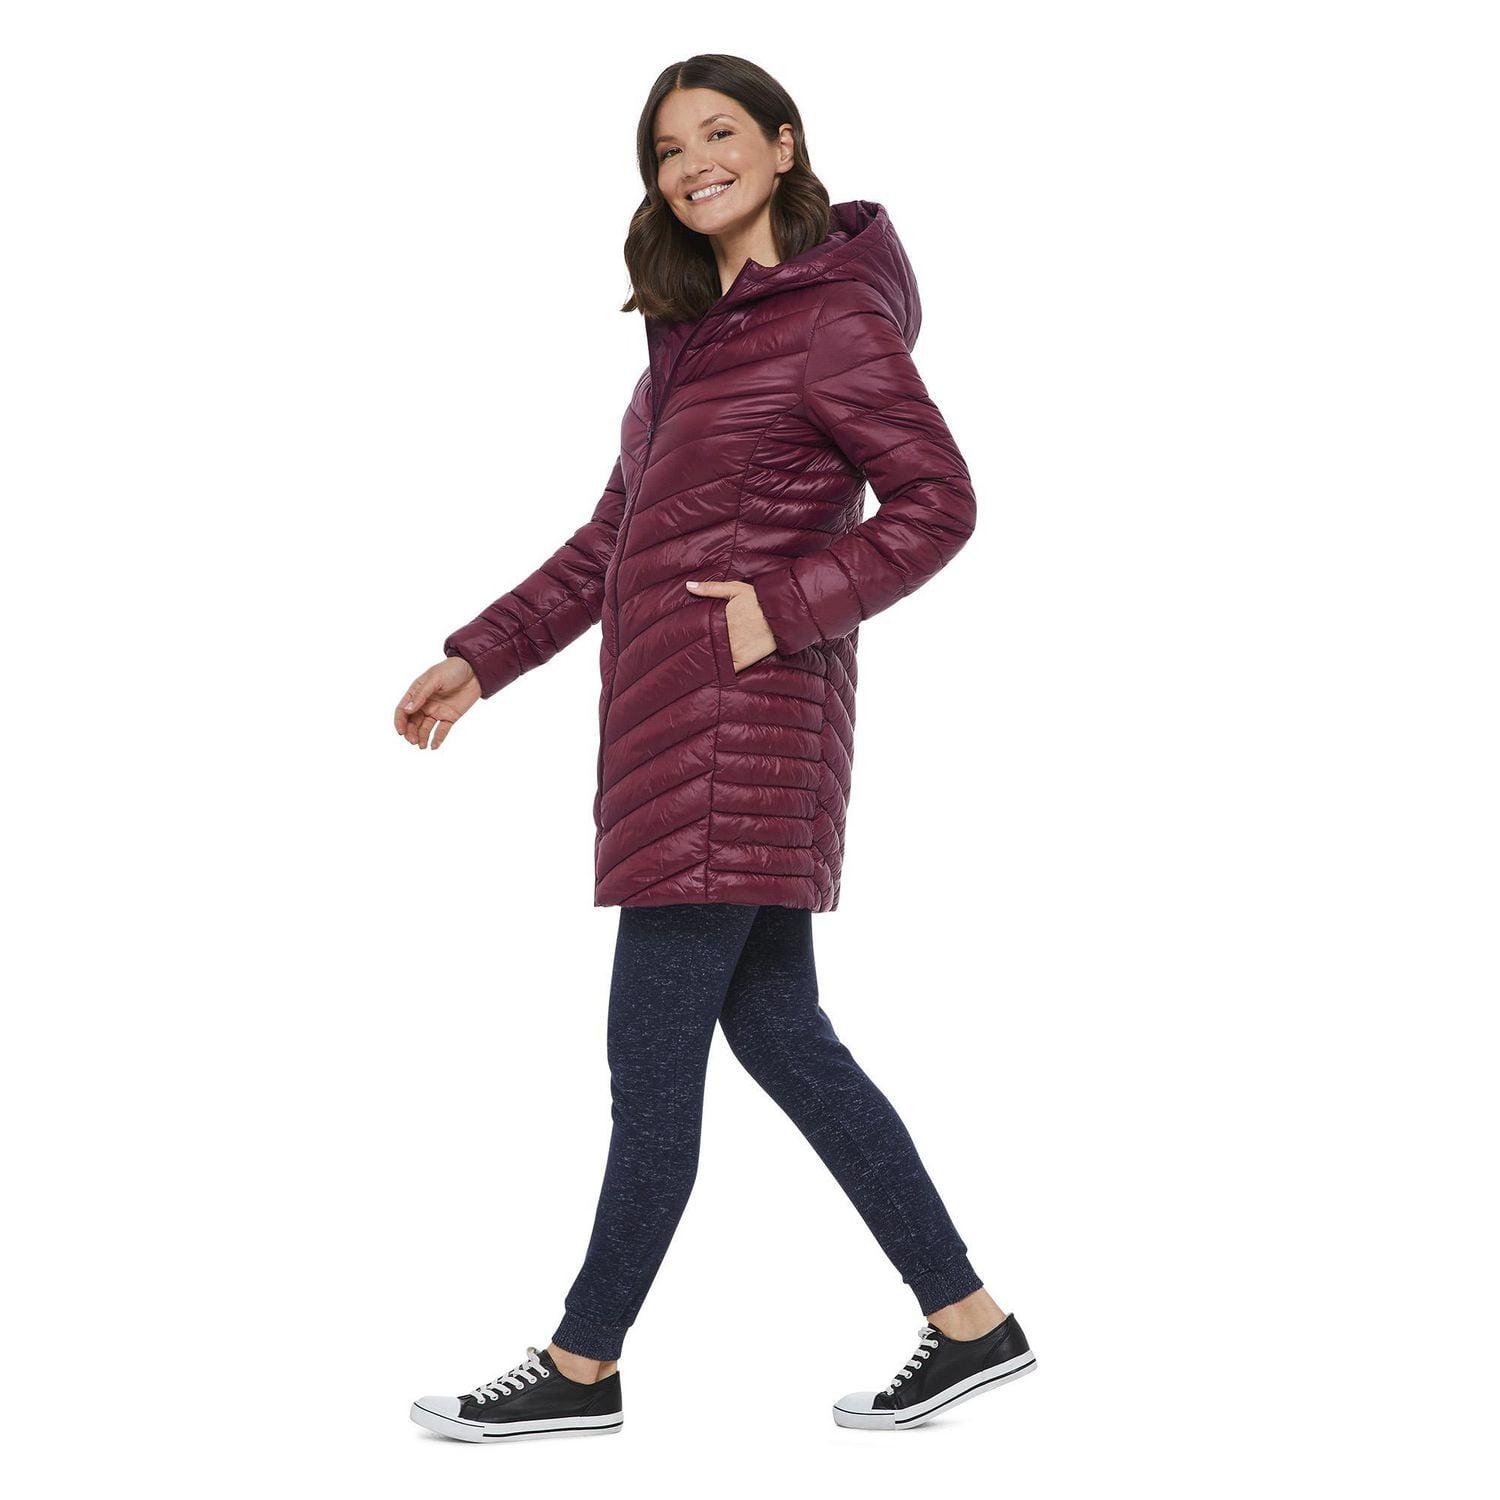 All In Motion Women's Packable Down Puffer Jacket